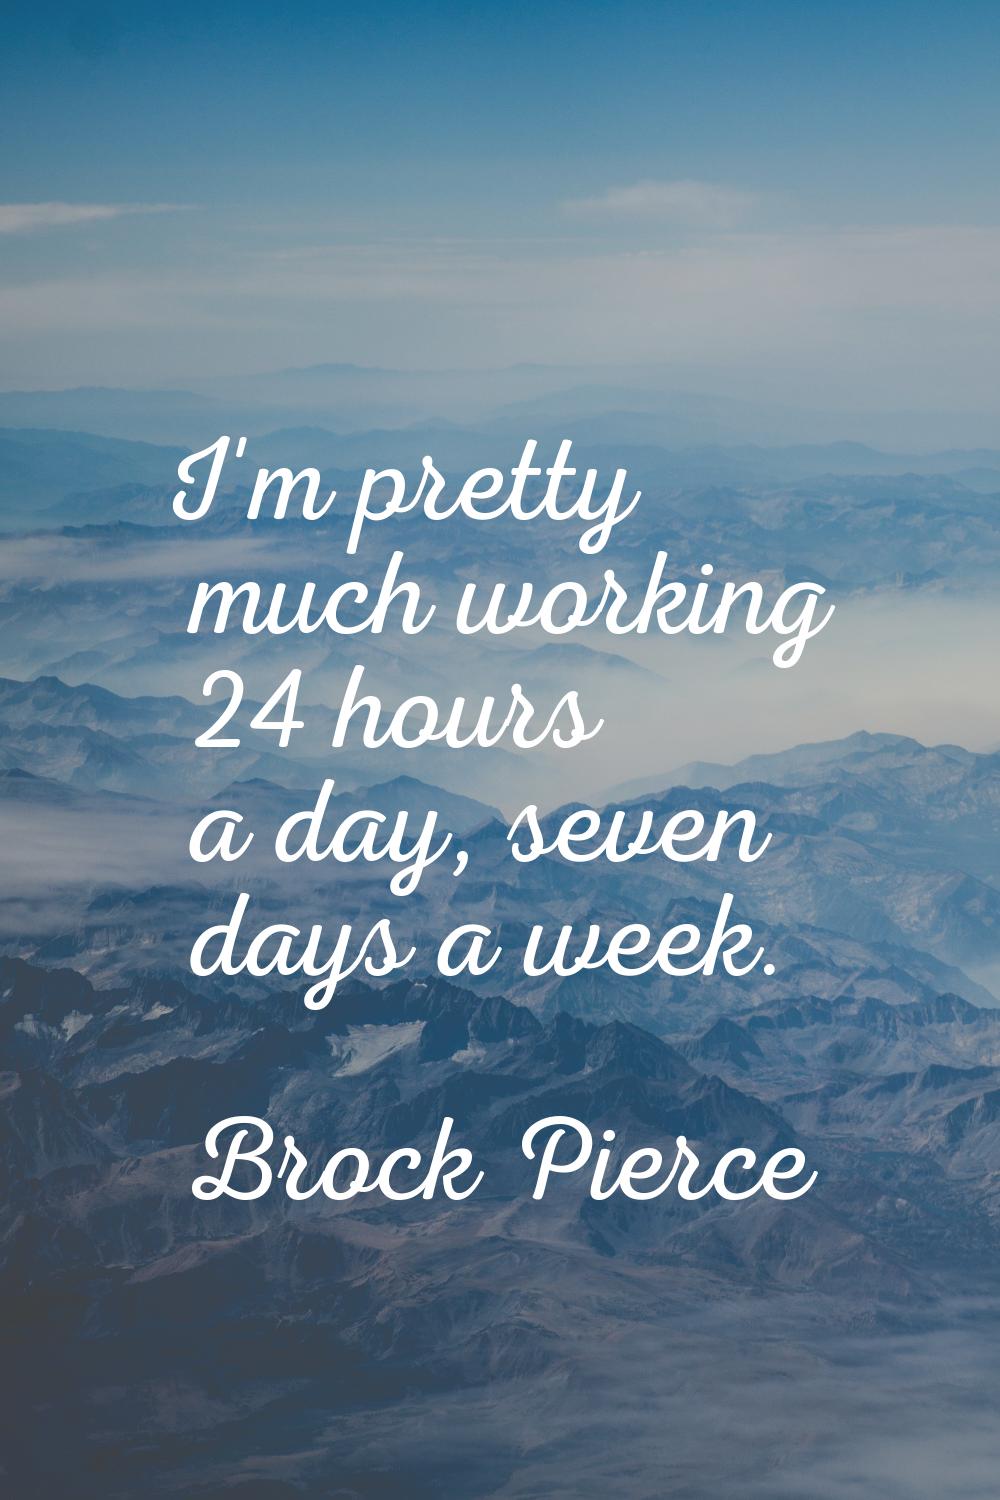 I'm pretty much working 24 hours a day, seven days a week.